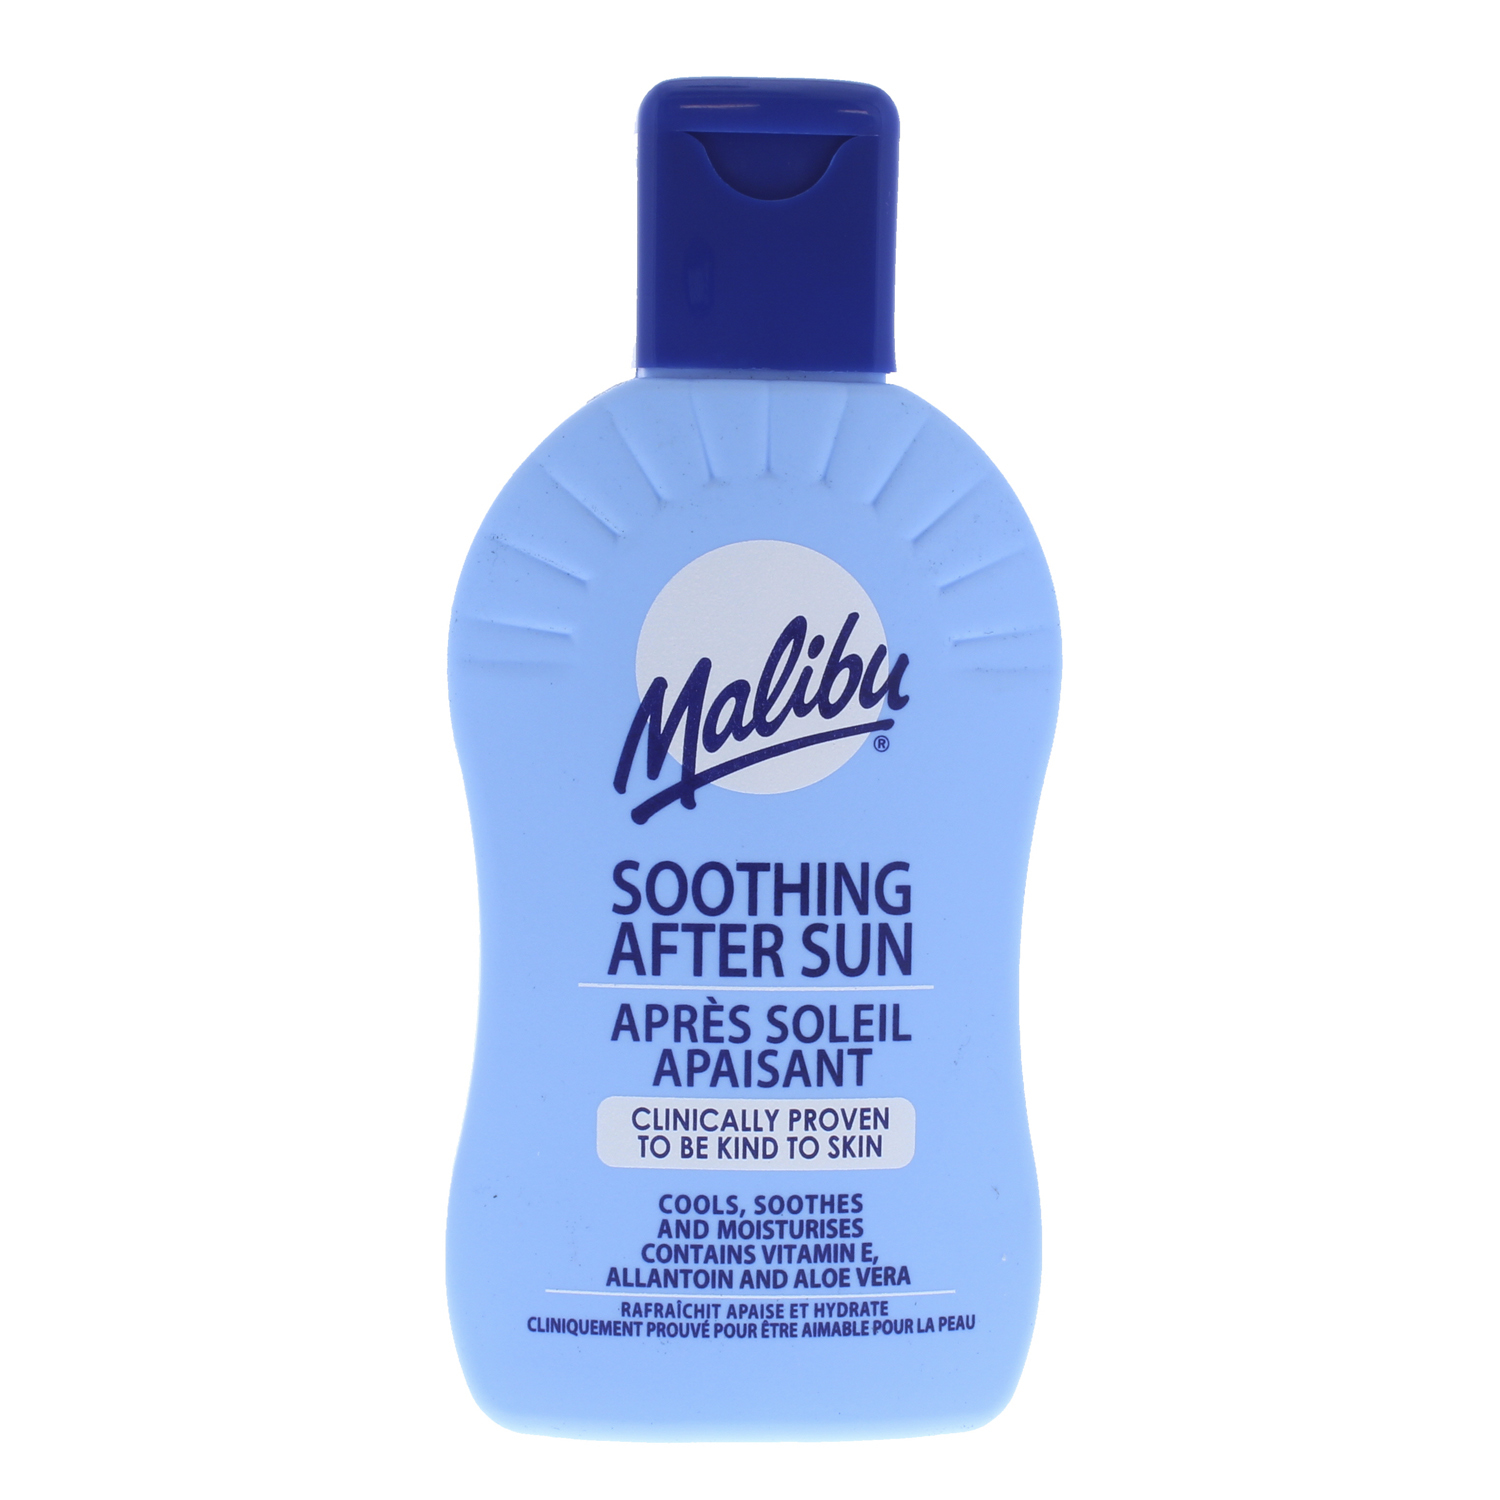 Malibu Soothing After Sun Lotion - 200ml Image